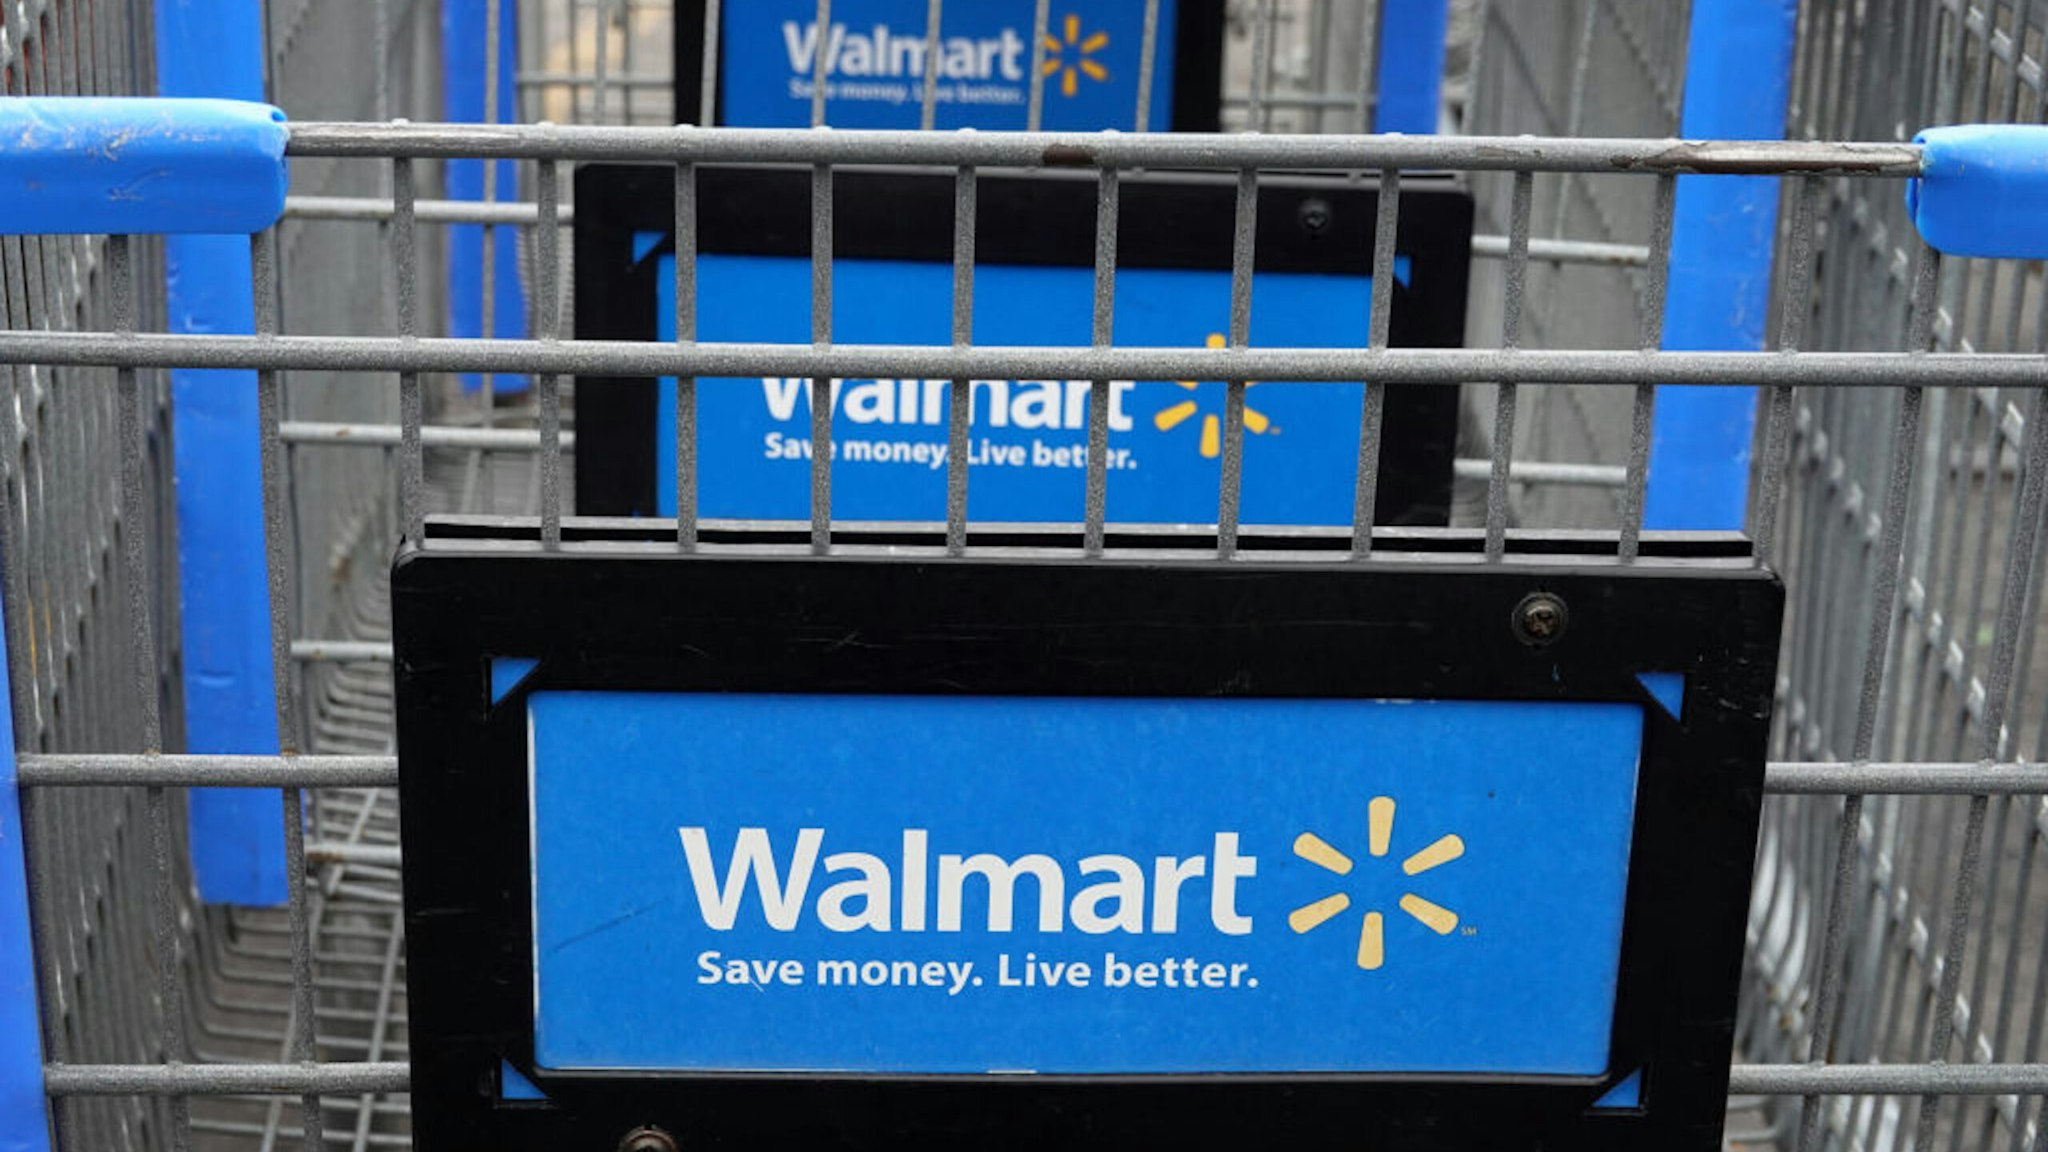 CHICAGO, ILLINOIS - MAY 19: Shopping carts sit in the parking lot of a Walmart store on May 19, 2020 in Chicago, Illinois. Walmart reported a 74% increase in U.S. online sales for the quarter that ended April 30, and a 10% increase in same store sales for the same period as the effects of the coronavirus helped to boost sales.